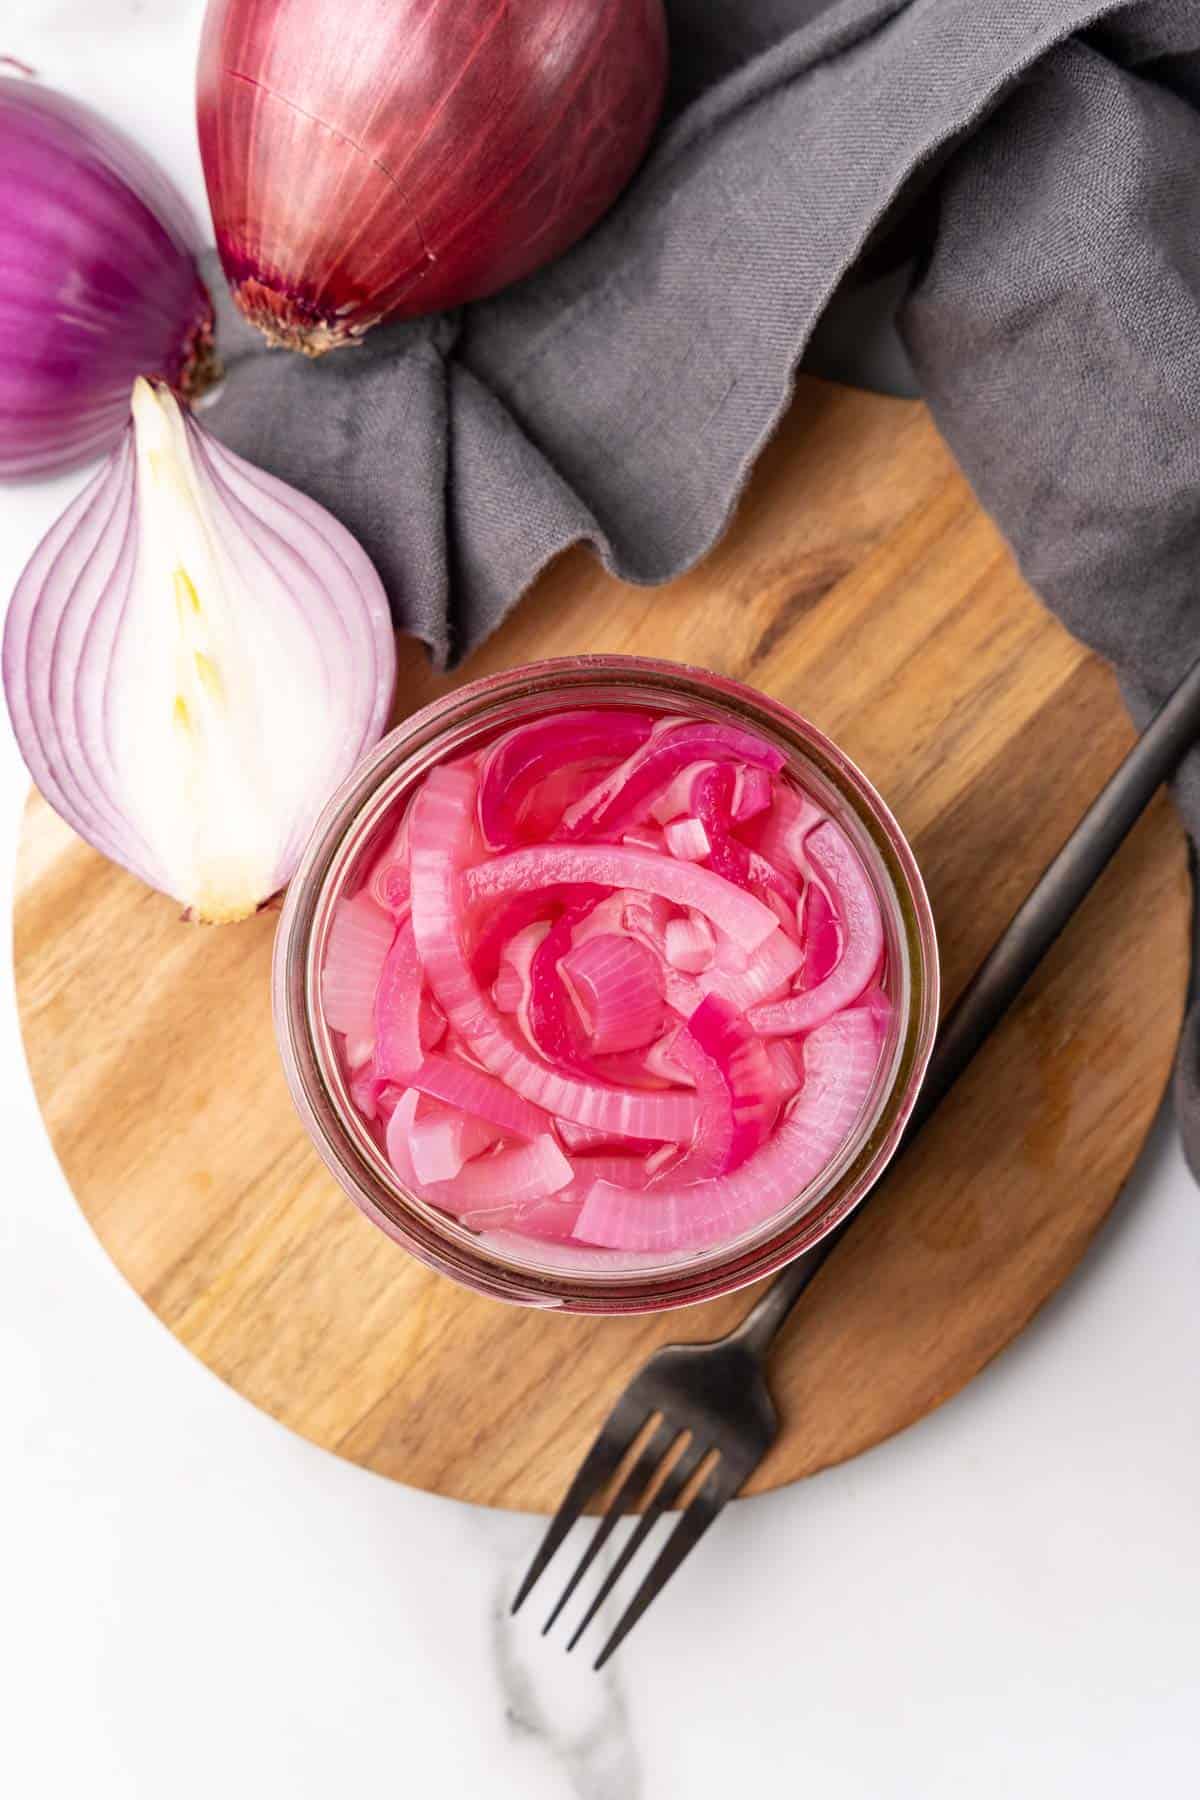 Overhead view of relish in a glass jar on a wooden serving tray next to a metal fork and half of a red onion